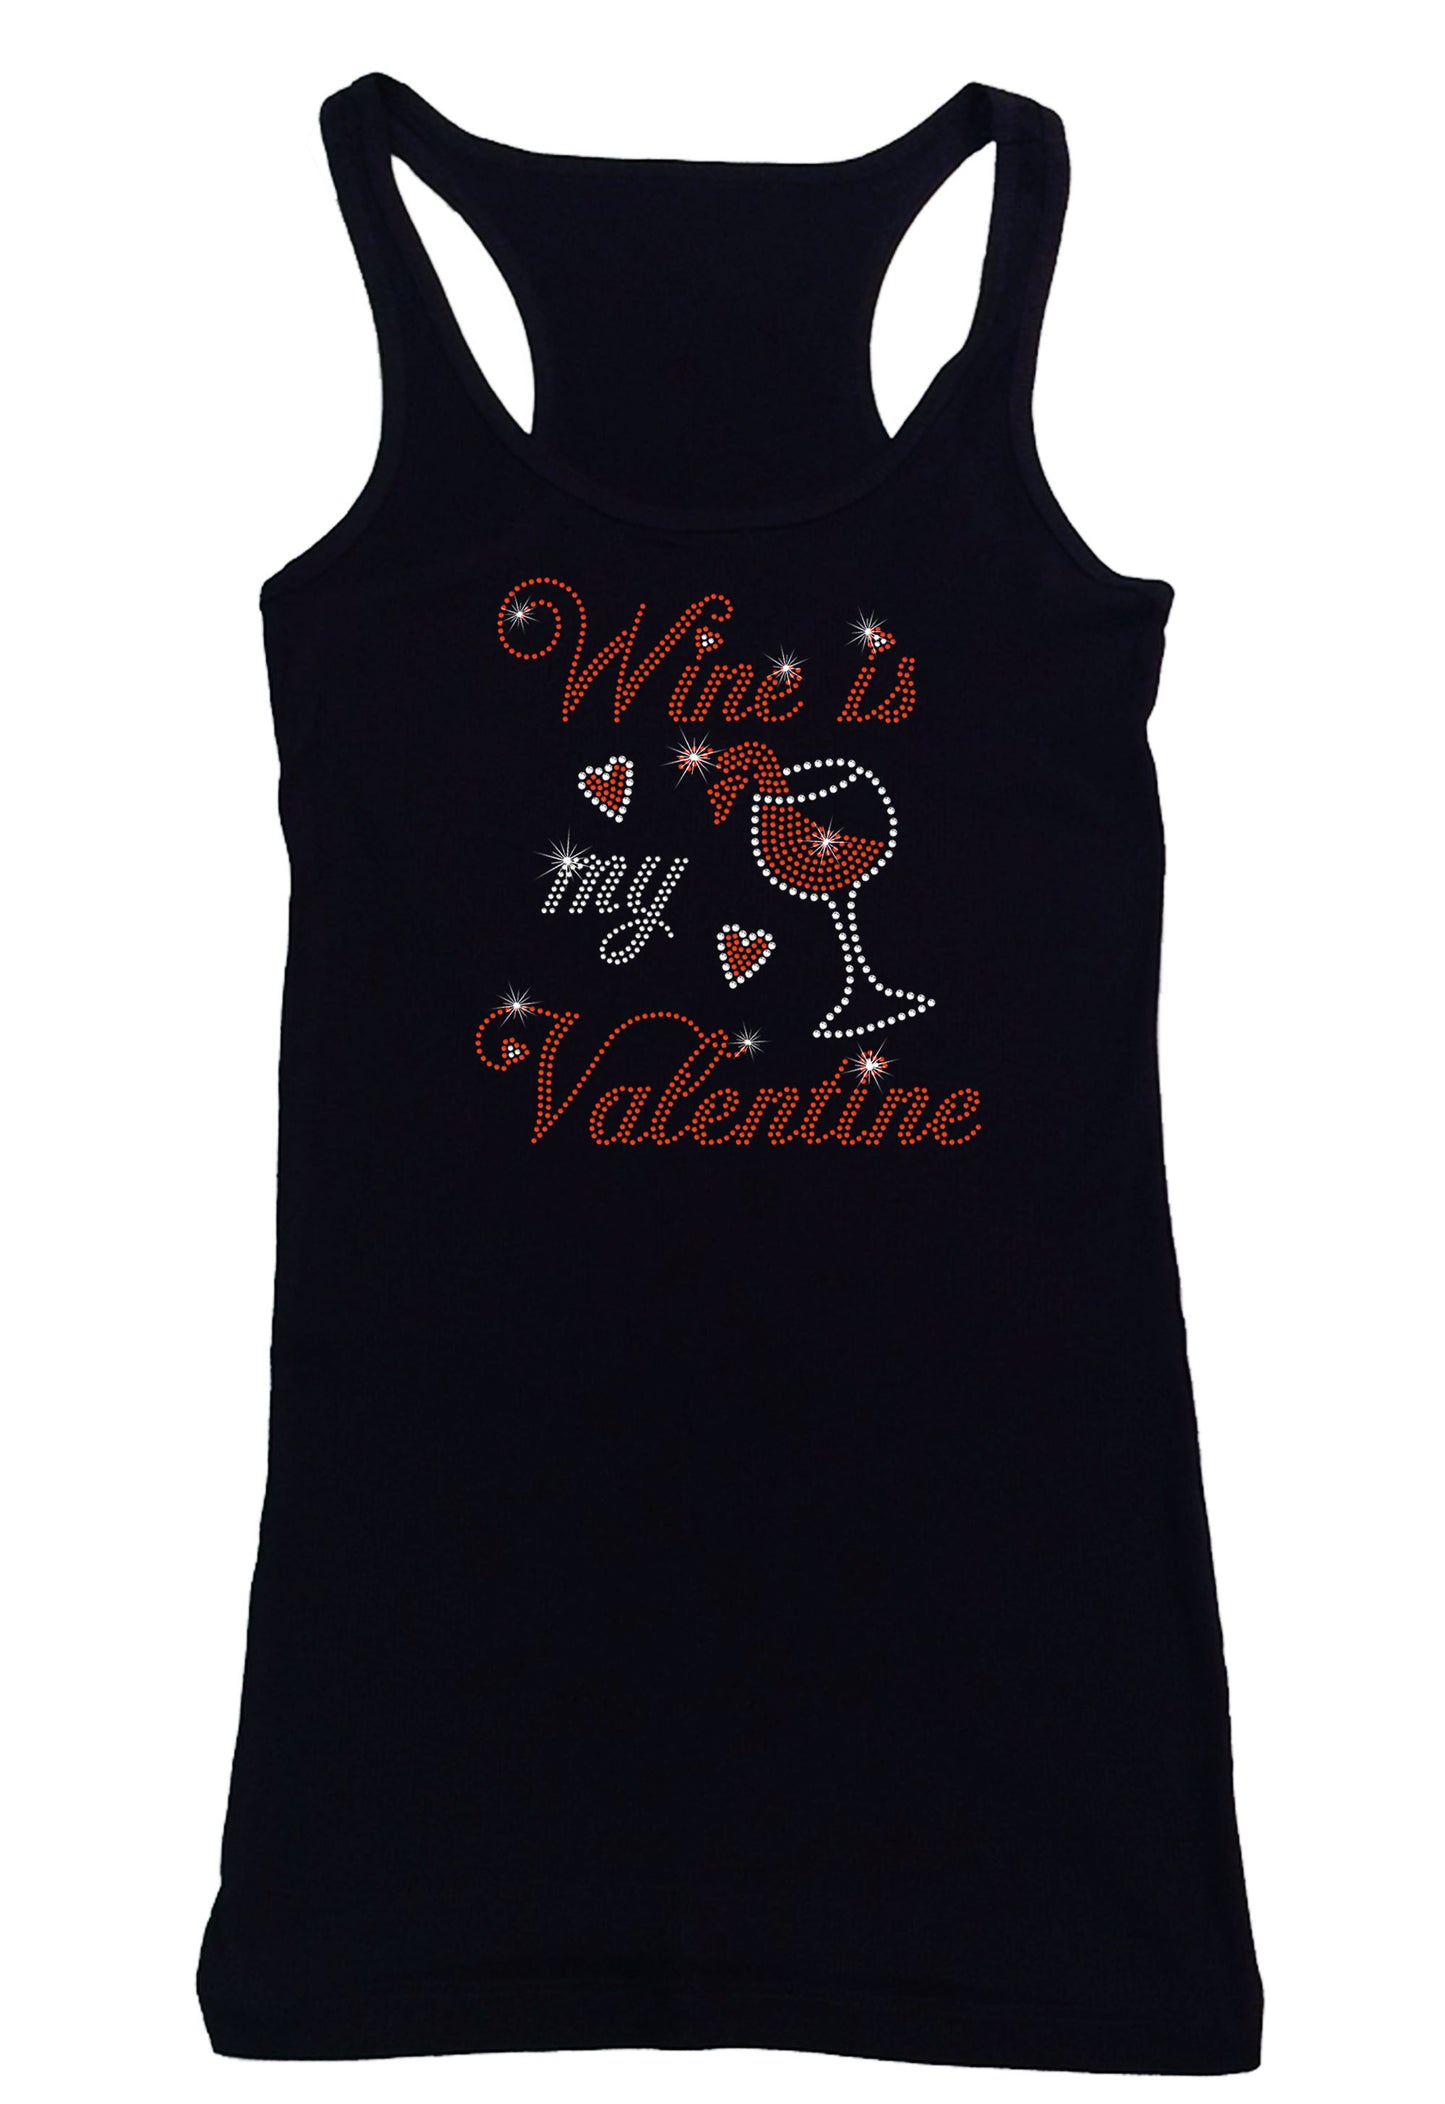 Women's Rhinestone Fitted Tight Snug Shirt Wine is My Valentine - with Wine Glass and Hearts